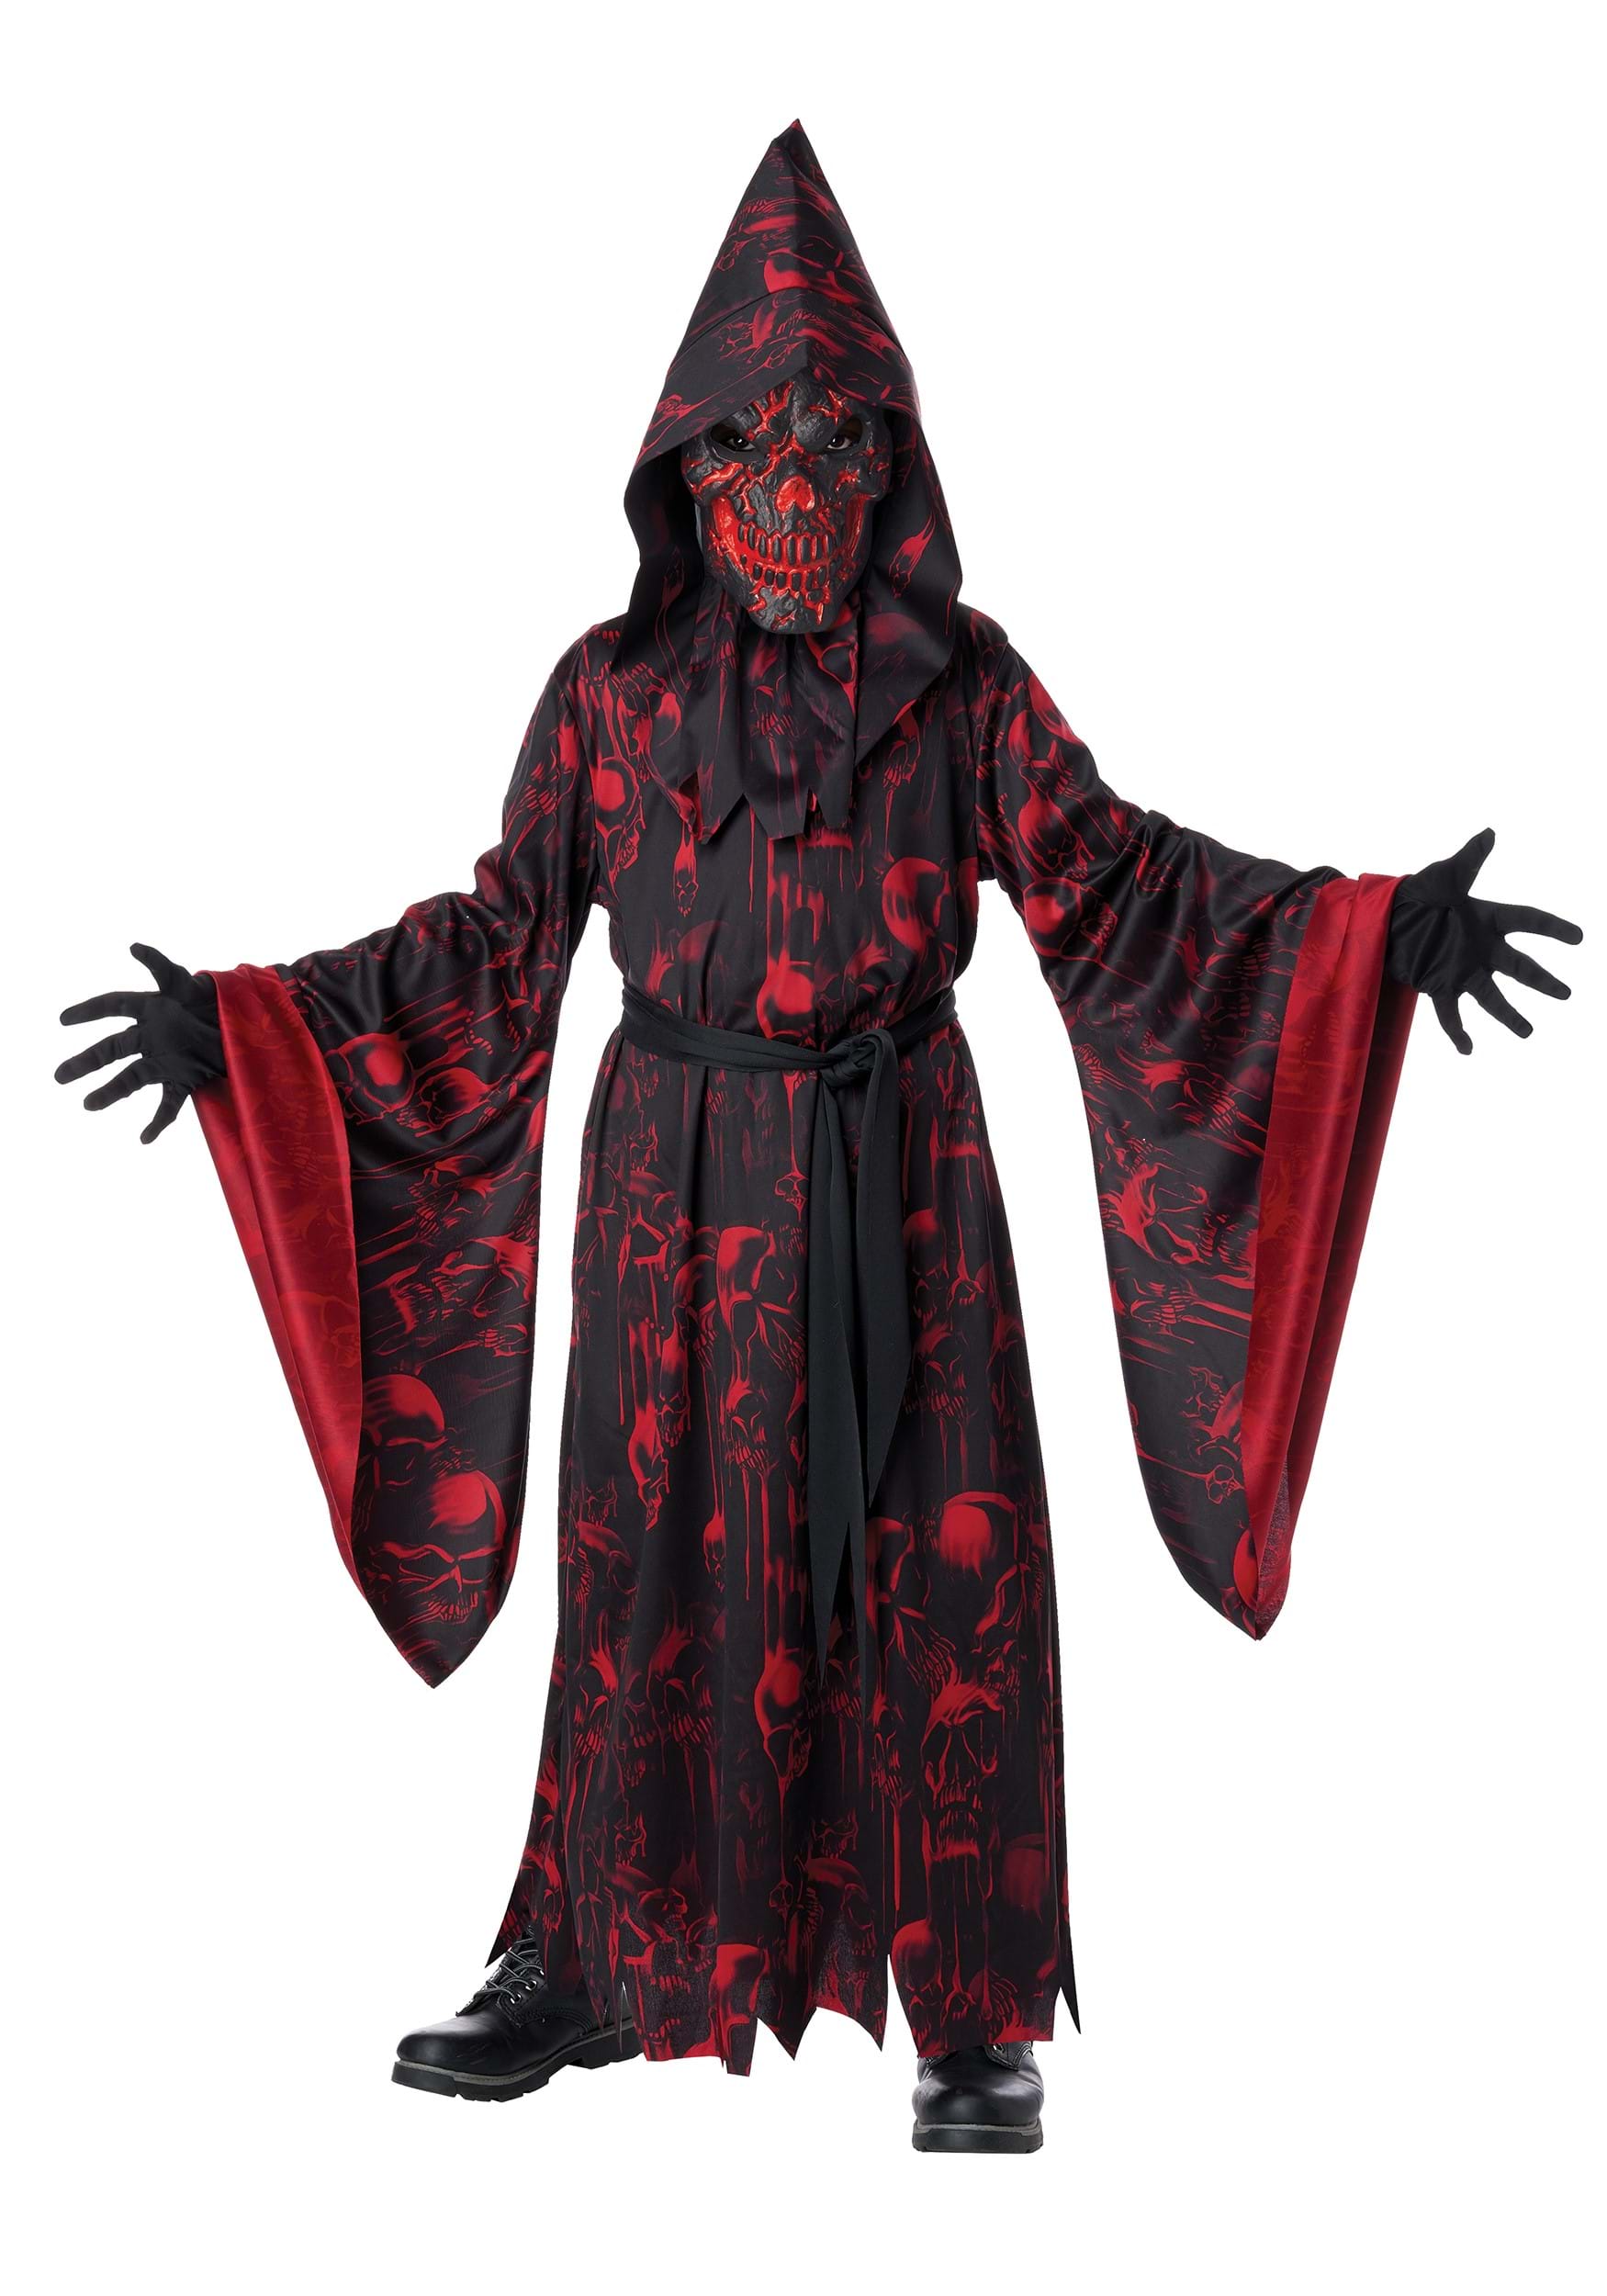 Fire & Brimstone Cult Costume w/ Light Up Mask for Boys